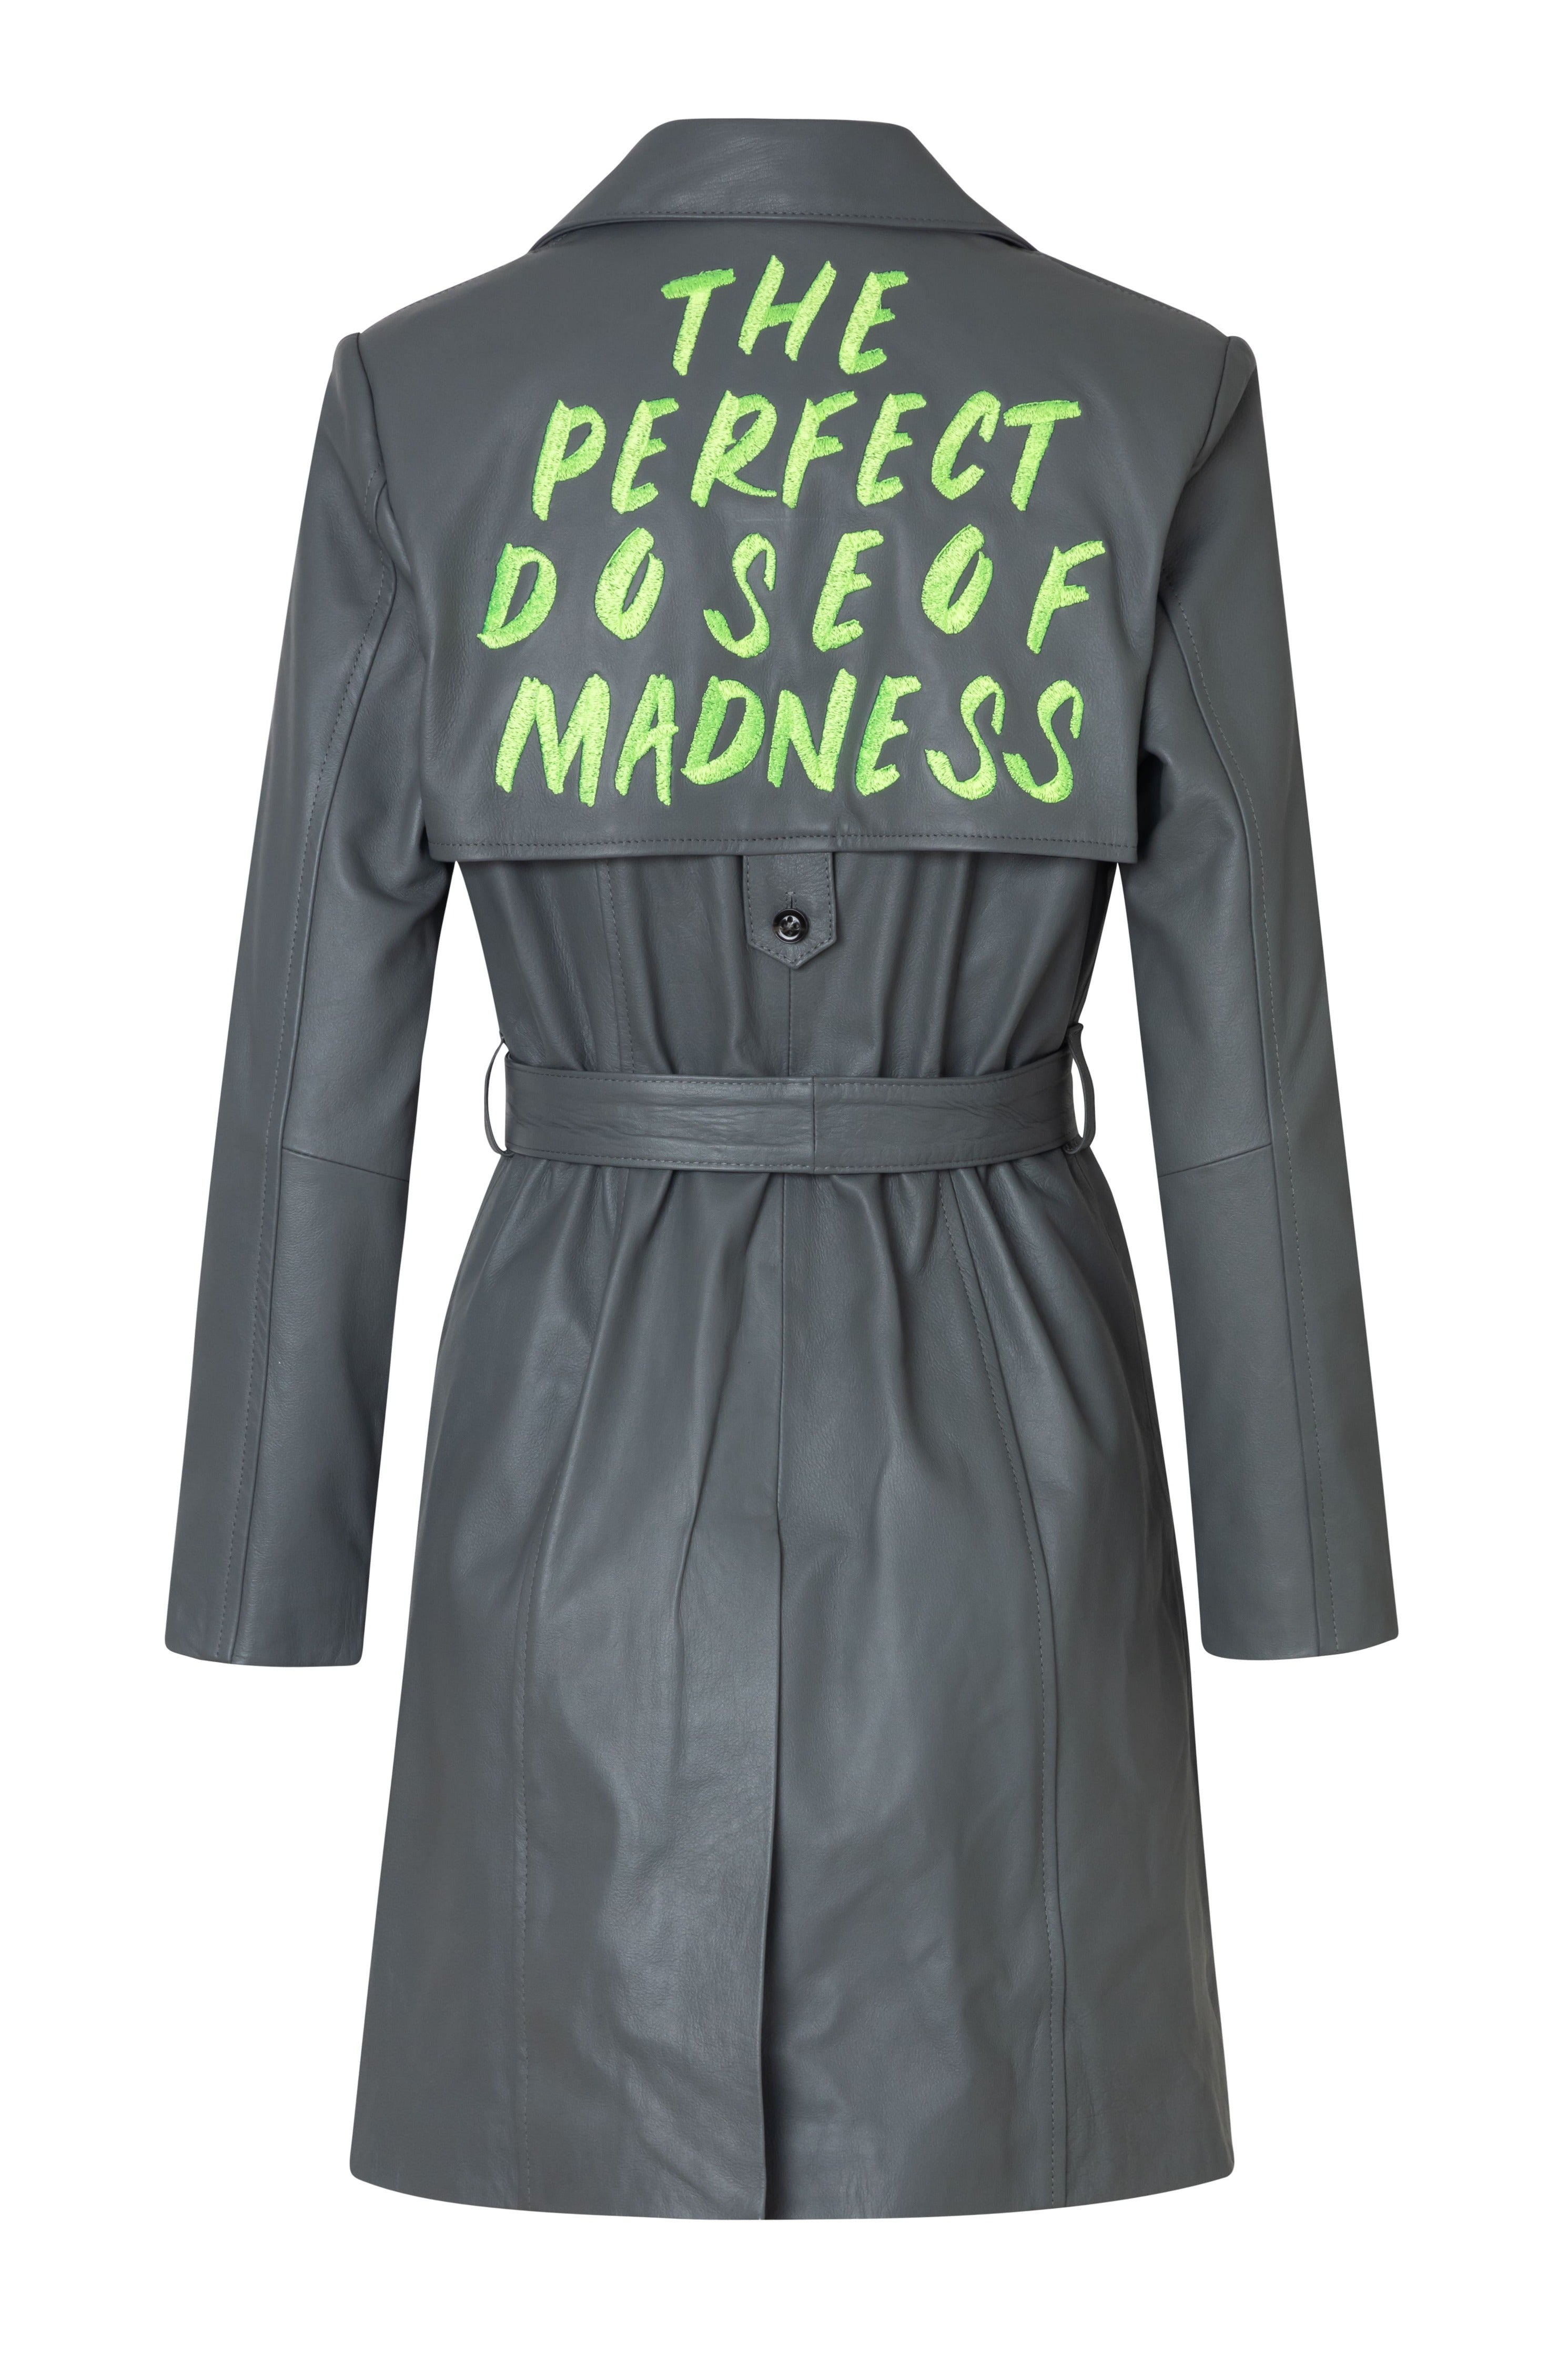 TRENCH coat - GREY - the PERFECT dose OF madness - DIVINA CASTIDAD